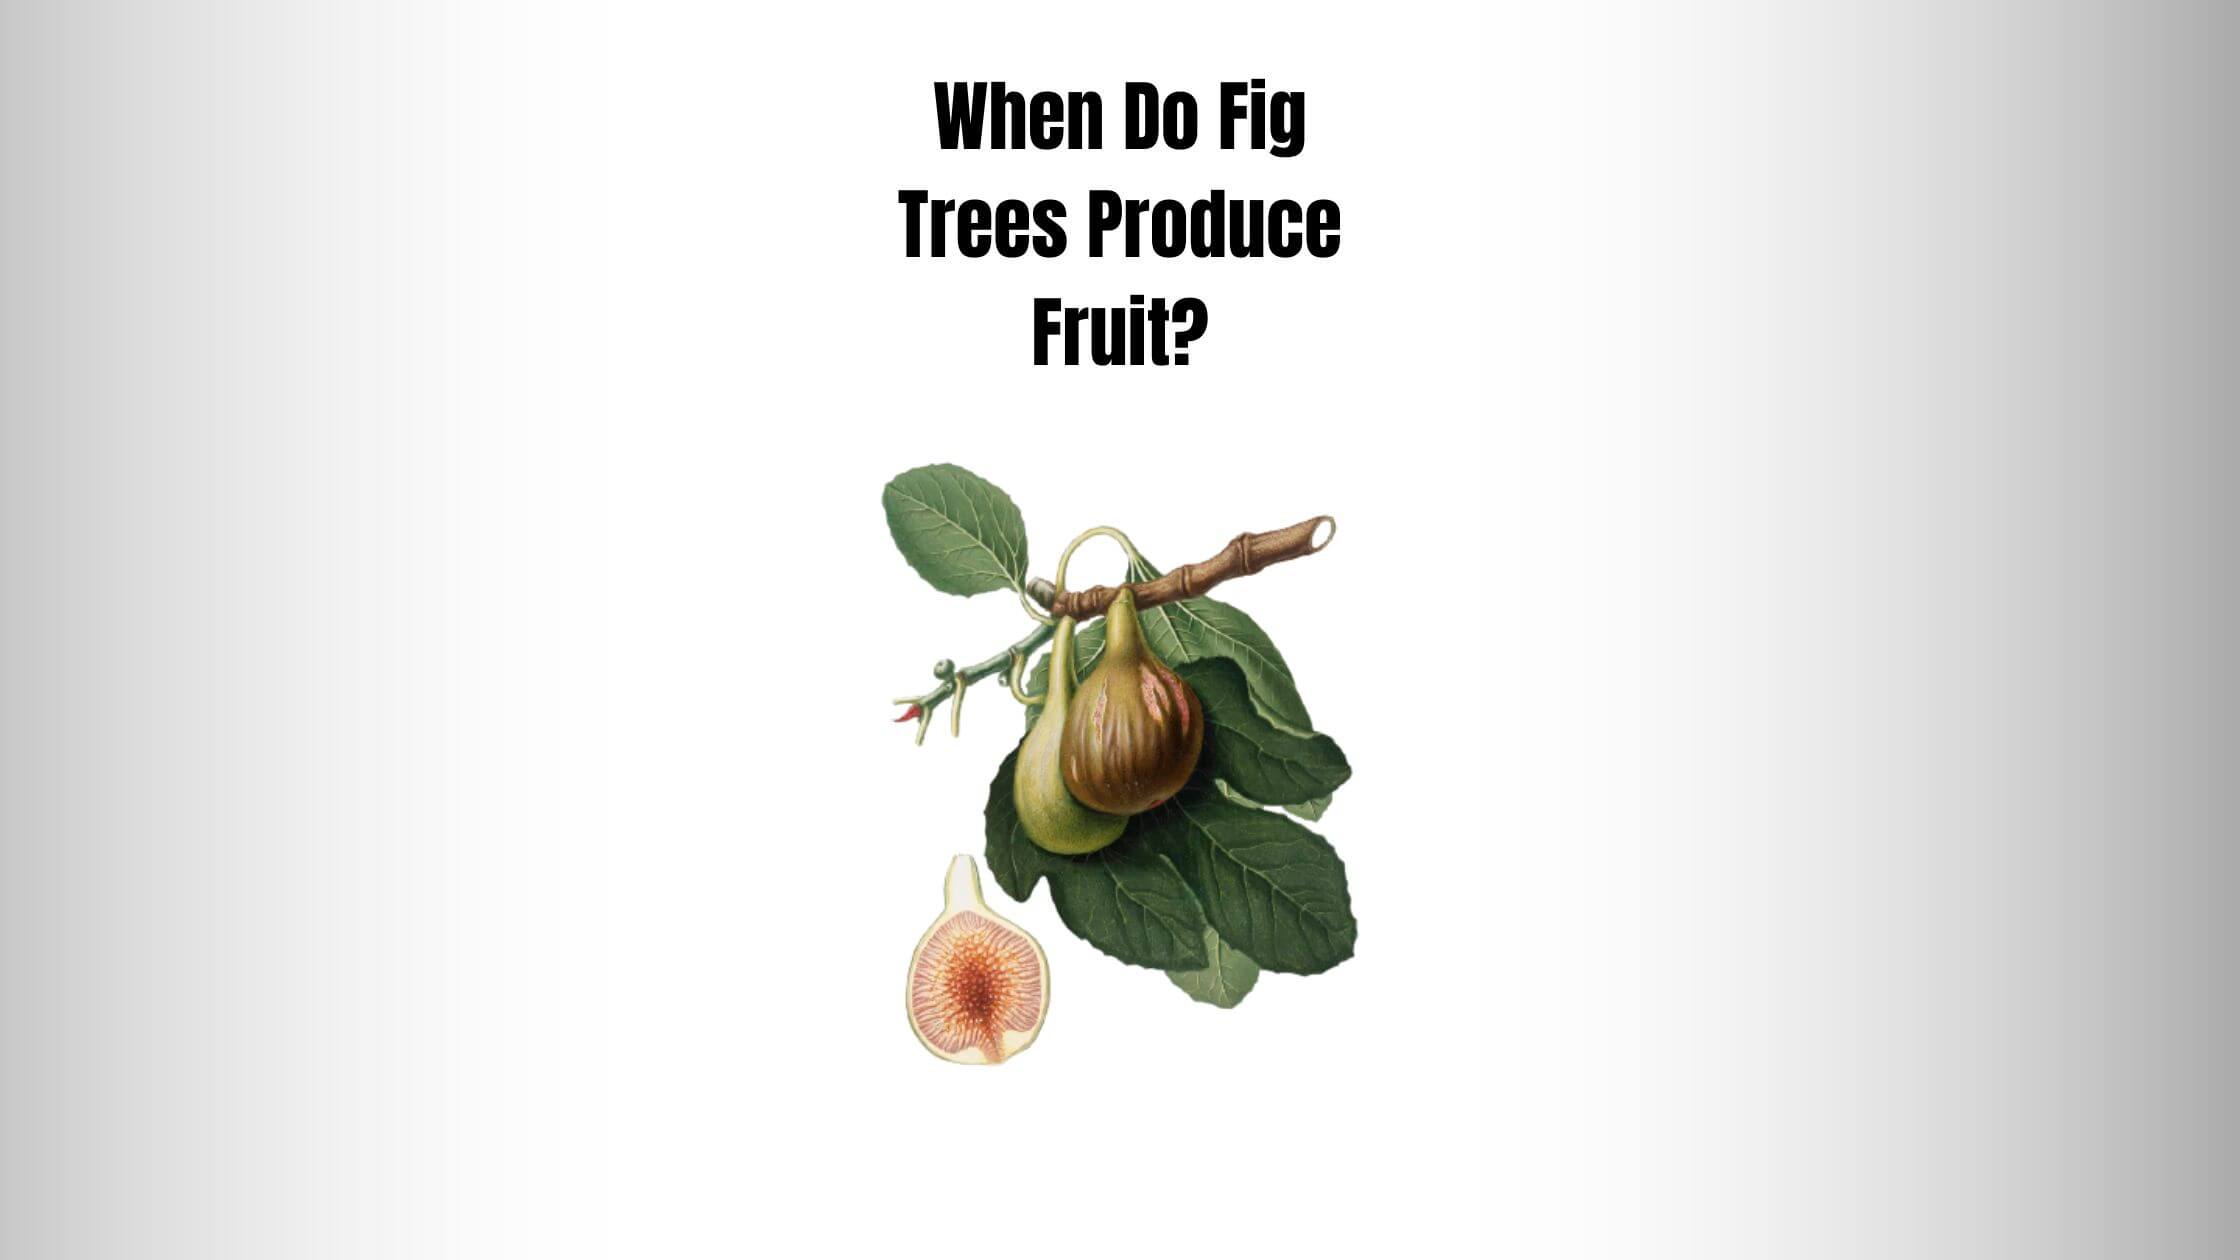 When Do Fig Trees Produce Fruit?